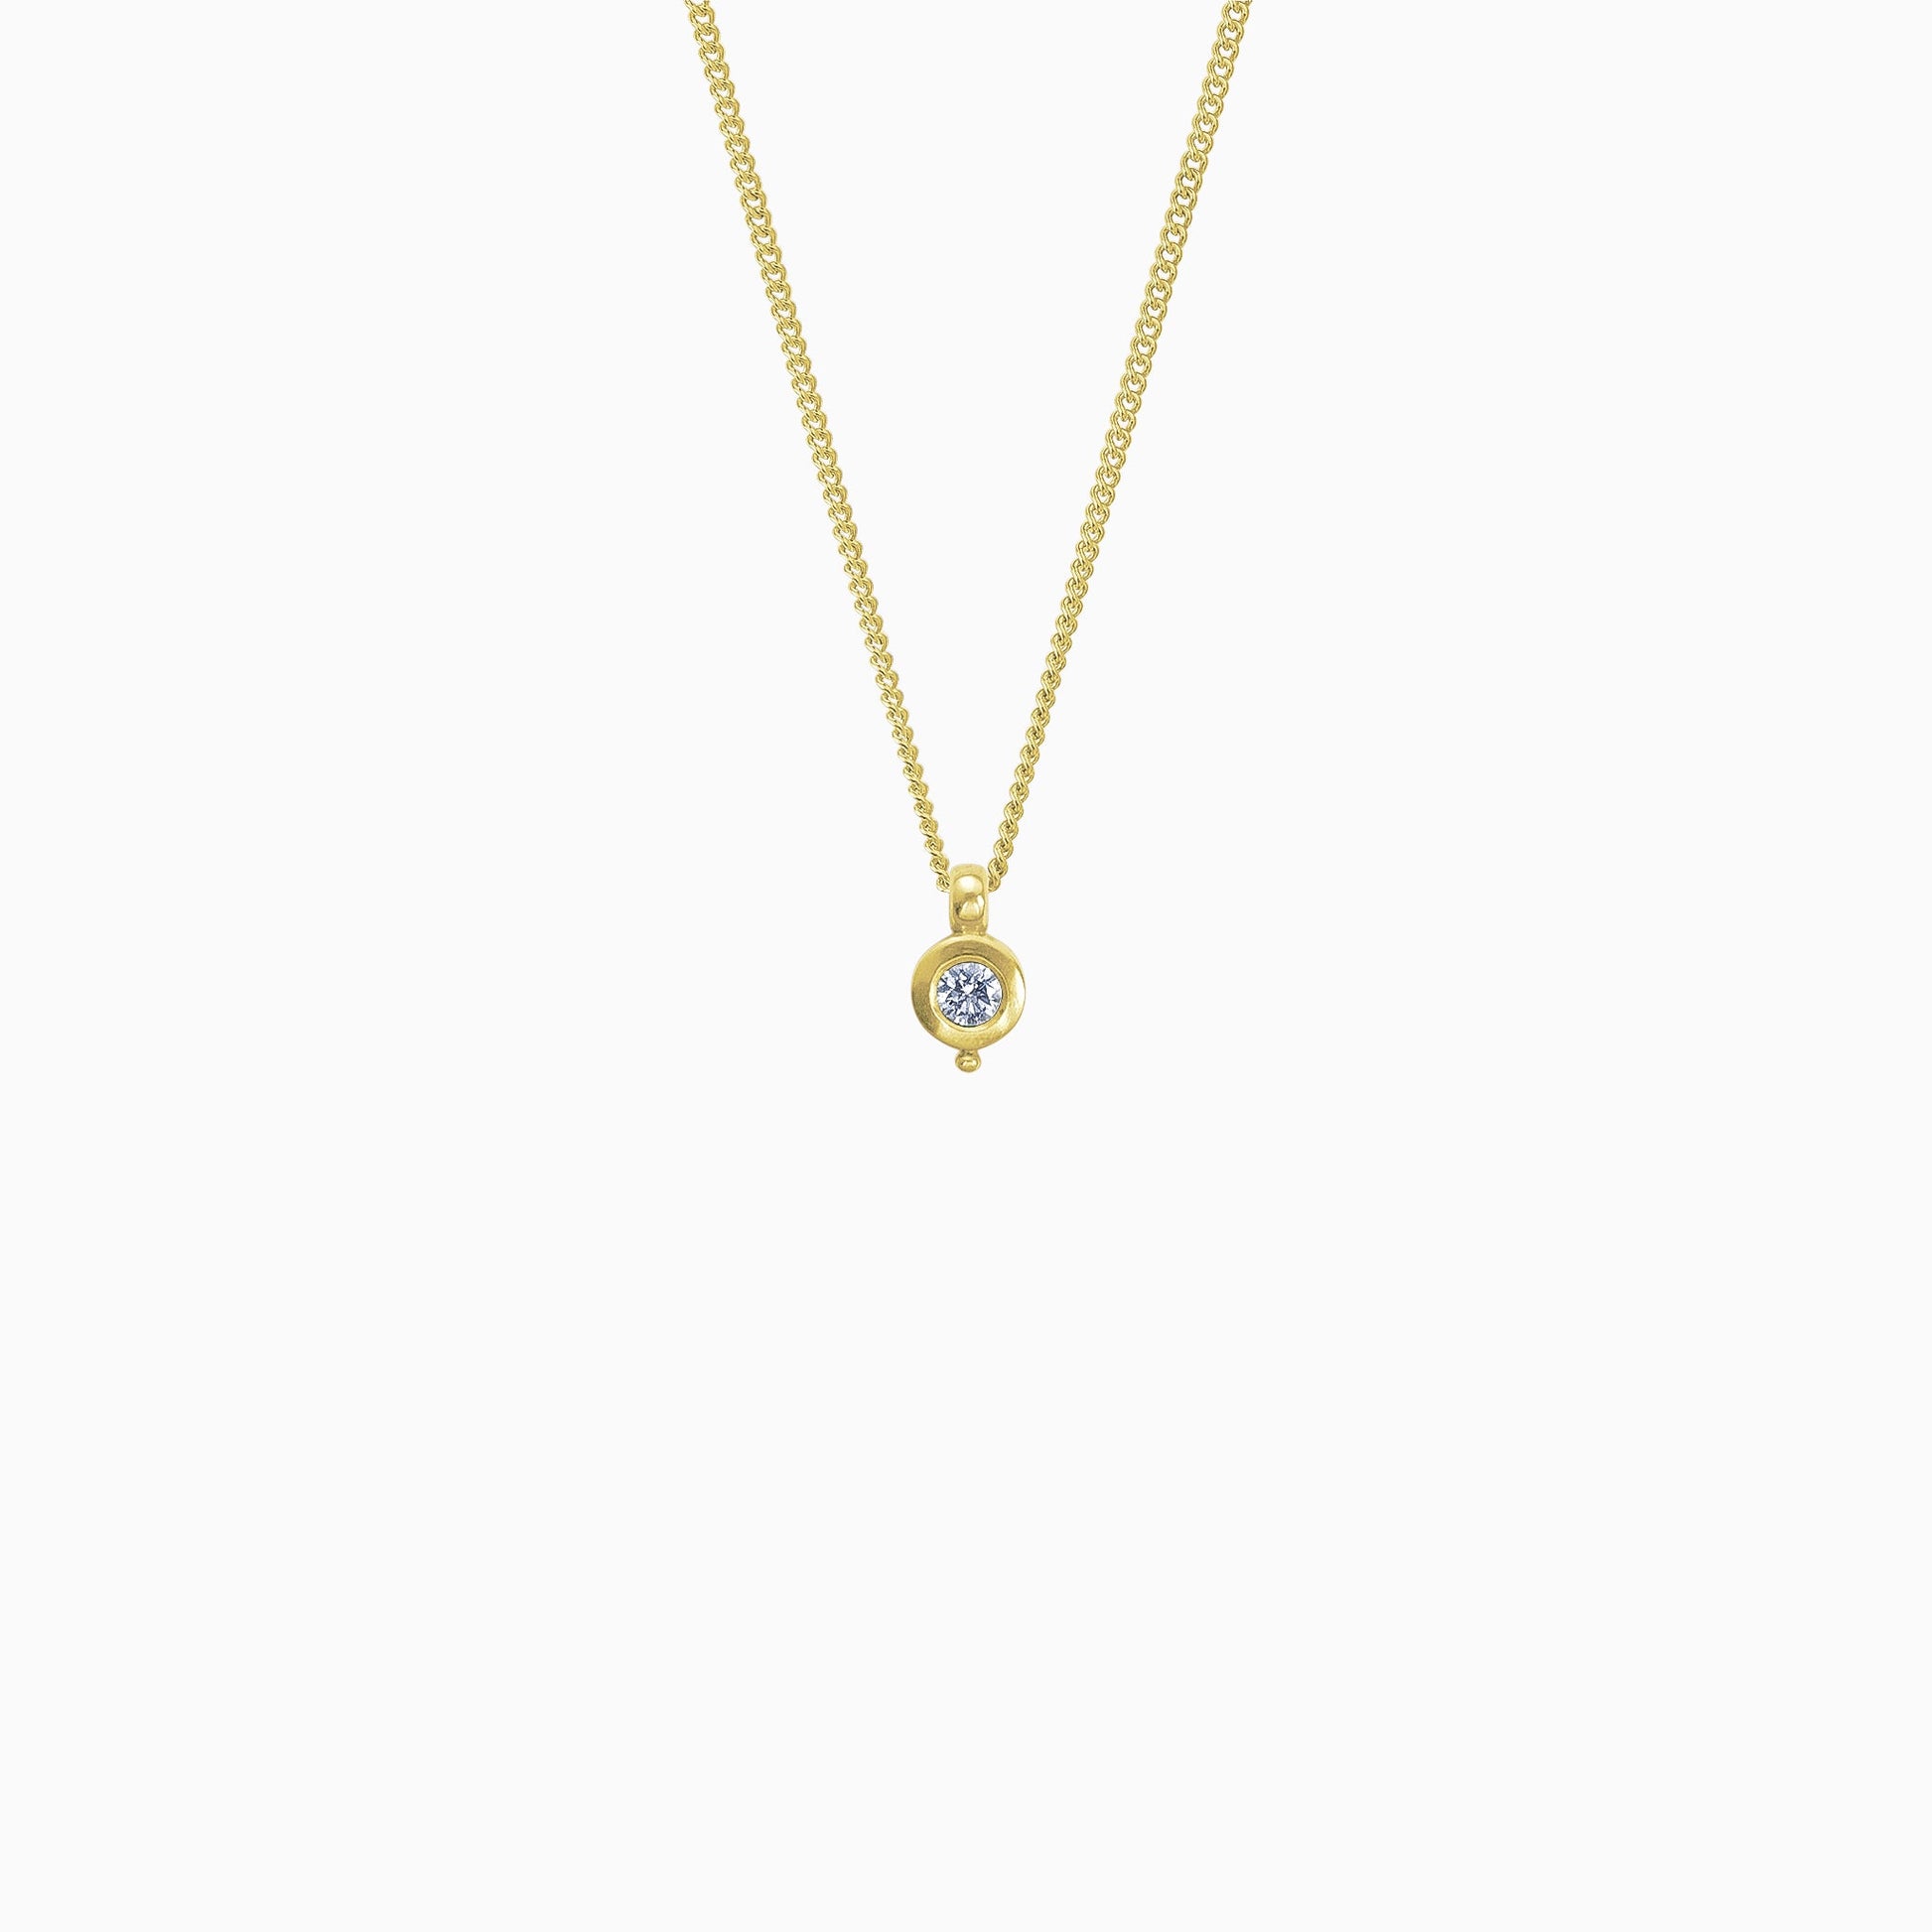 18ct Fairtrade yellow gold round pendant 12mm  x 7mm with small round bead attached below on a 45cm fine curb chain. Set with a 0.25ct round diamond.